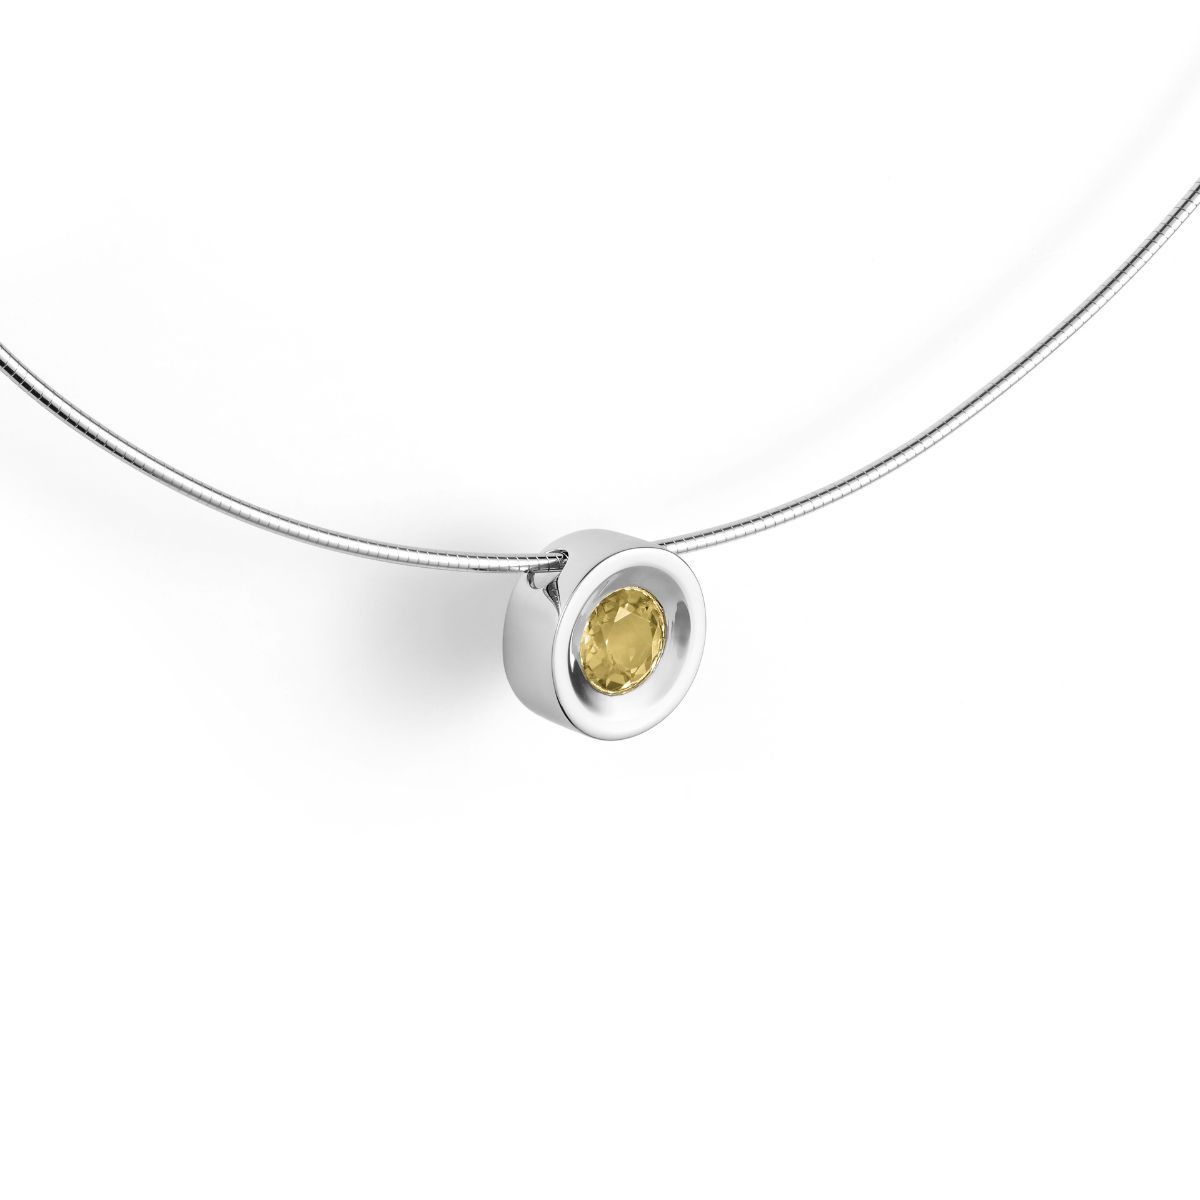 SILVER AND NATURAL CITRINE PENDANT